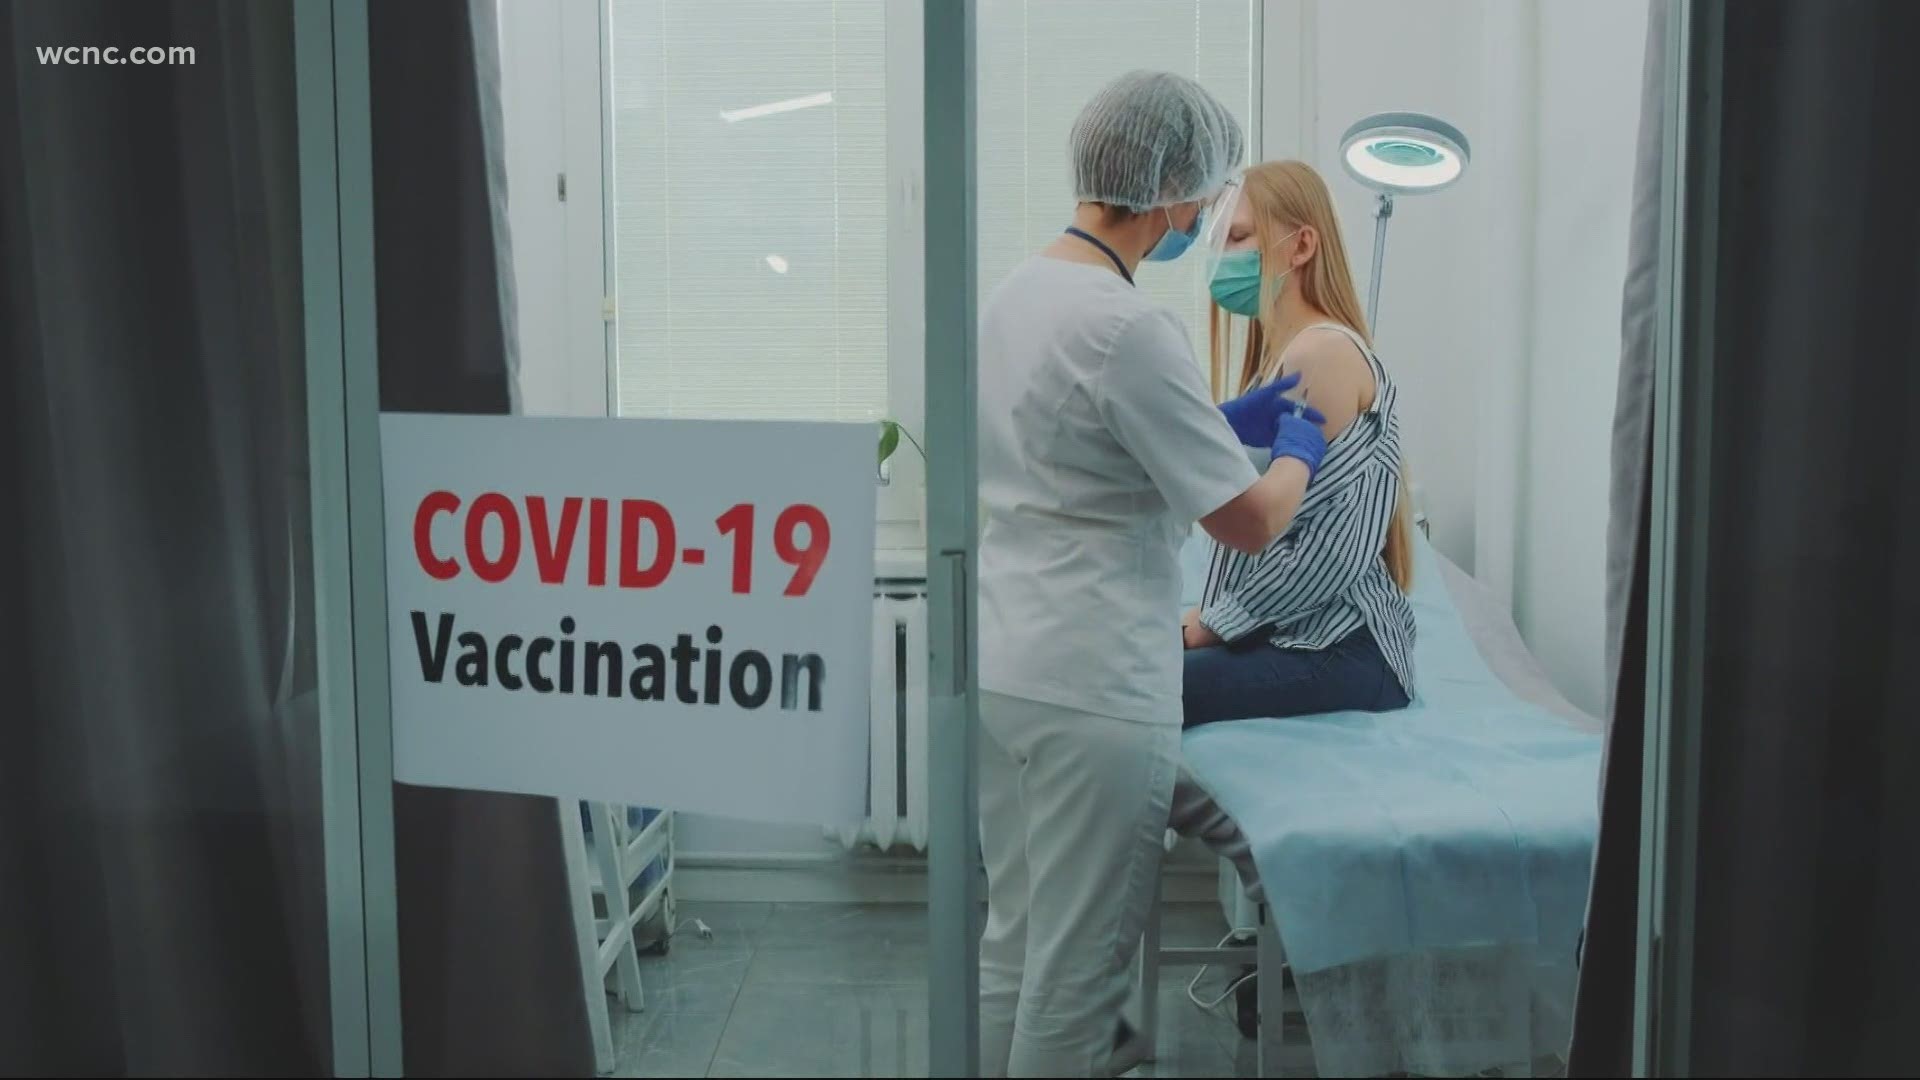 Vanessa Ruffes verifies if the COVID-19 vaccine is still effective if you don't get any side effects.